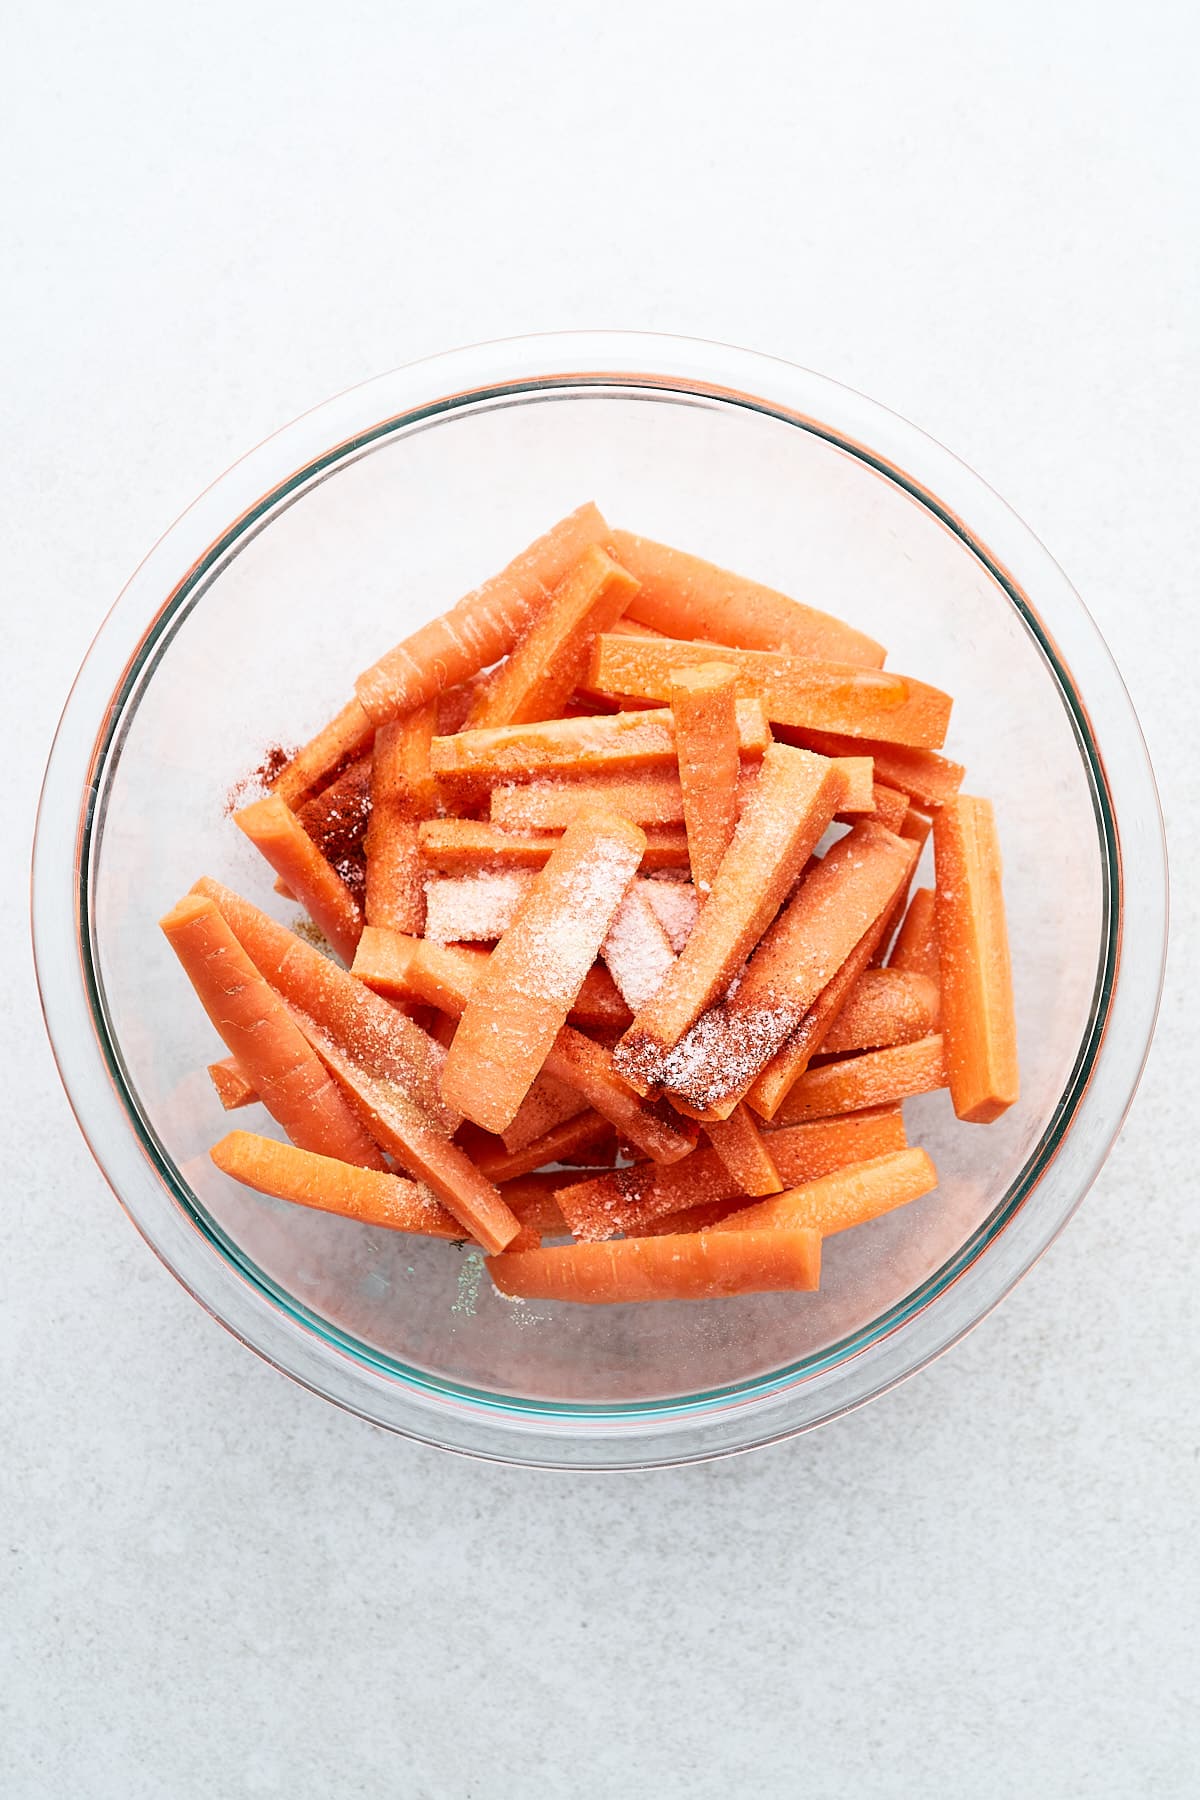 Carrot sticks and seasonings in a bowl.